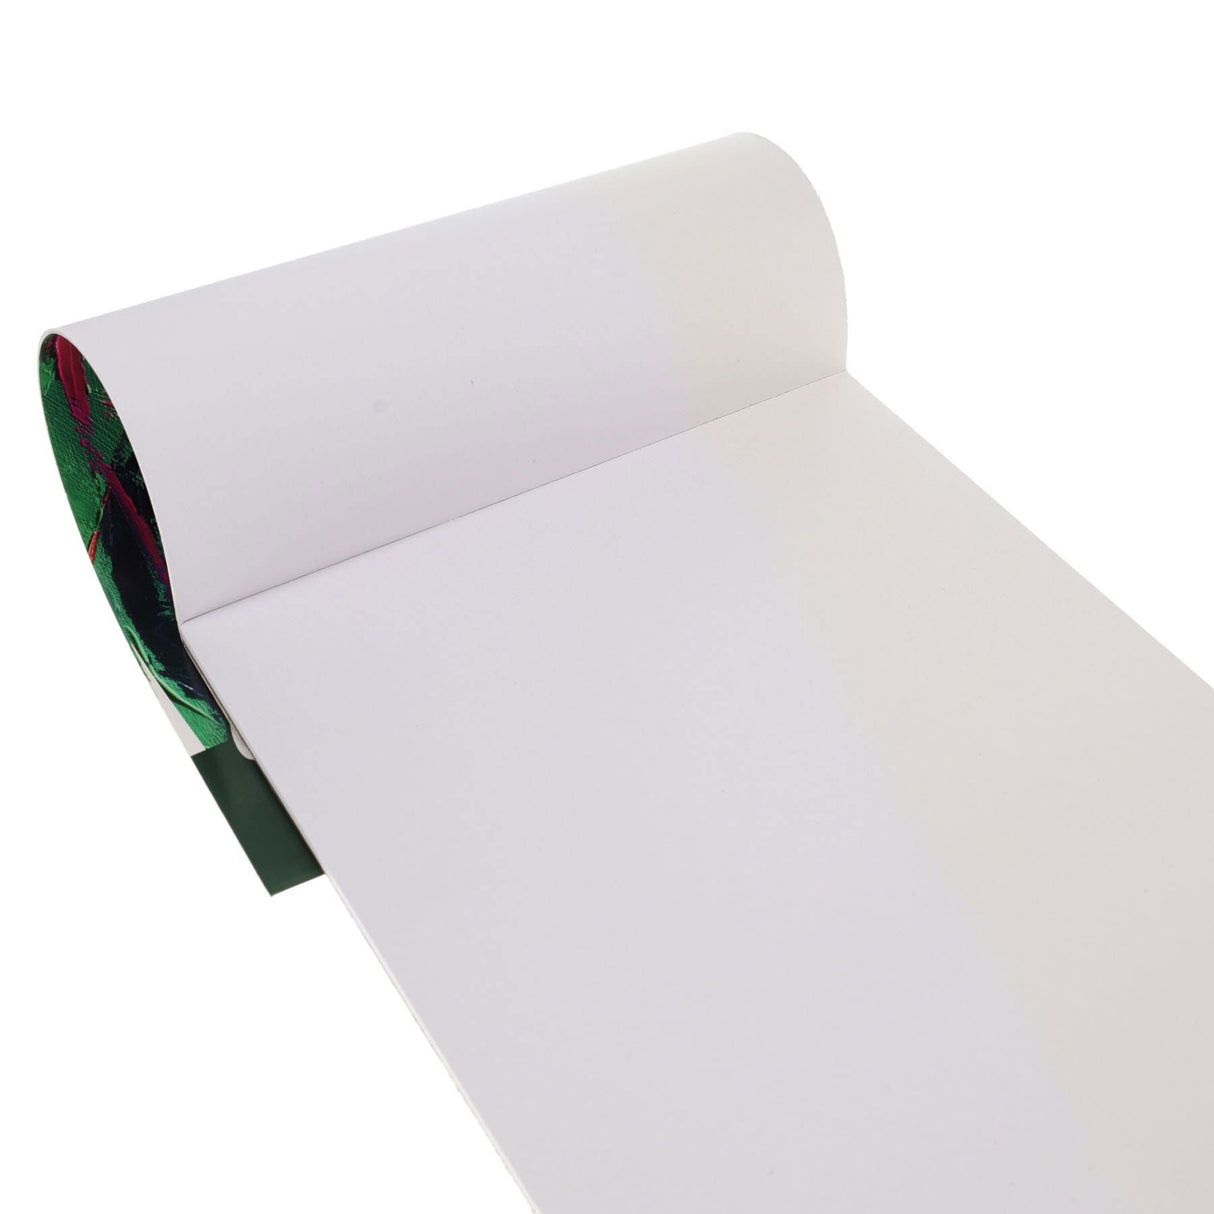 Icon A4 Canvas Paper - 220gsm - 12 Sheets | Stationery Shop UK